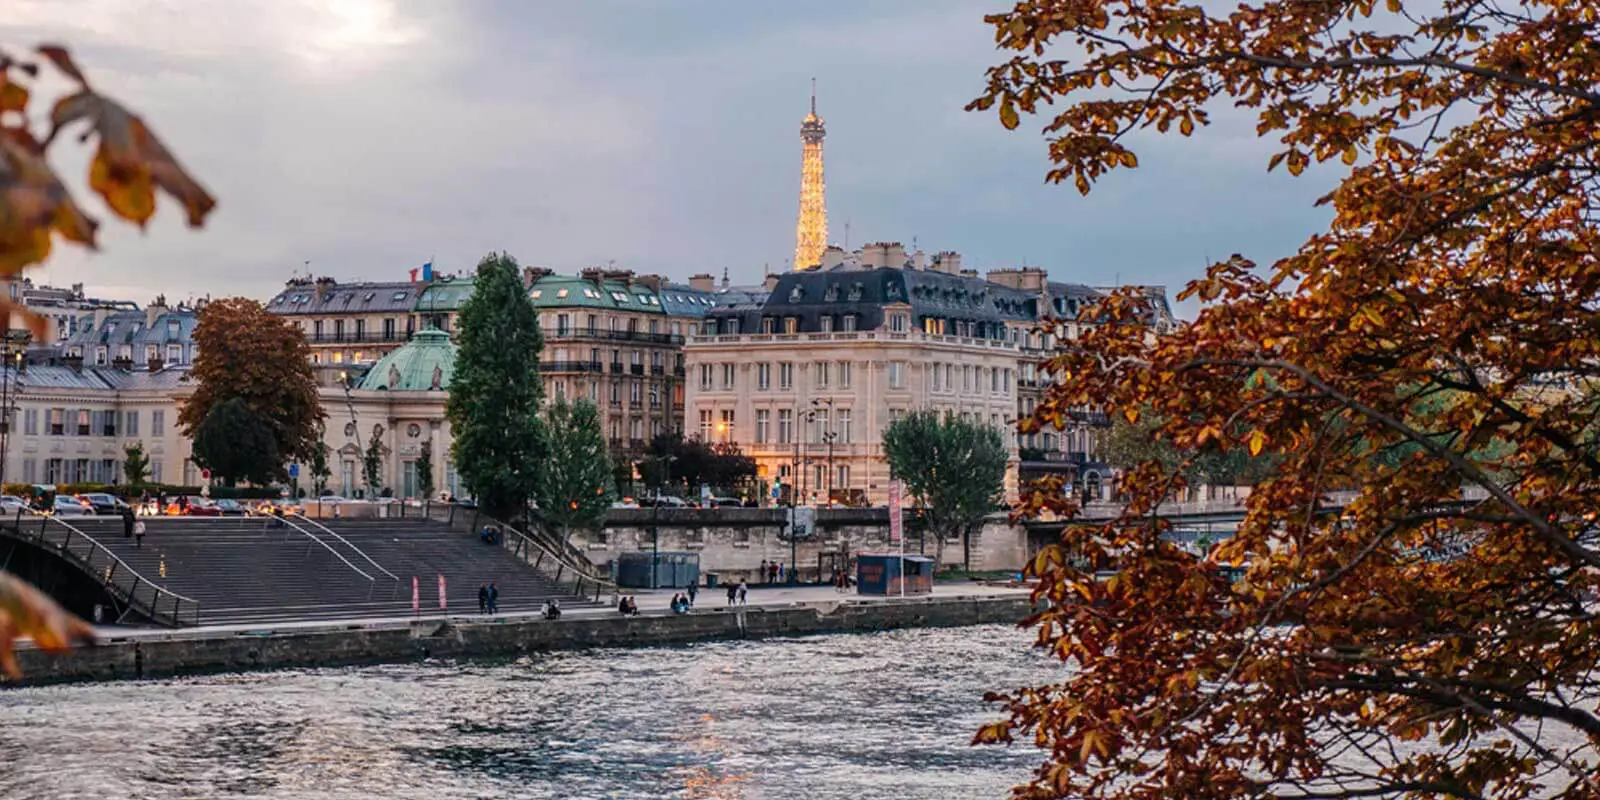 Landscape view of the Paris riverbank with the Eiffel Tower in the distance.